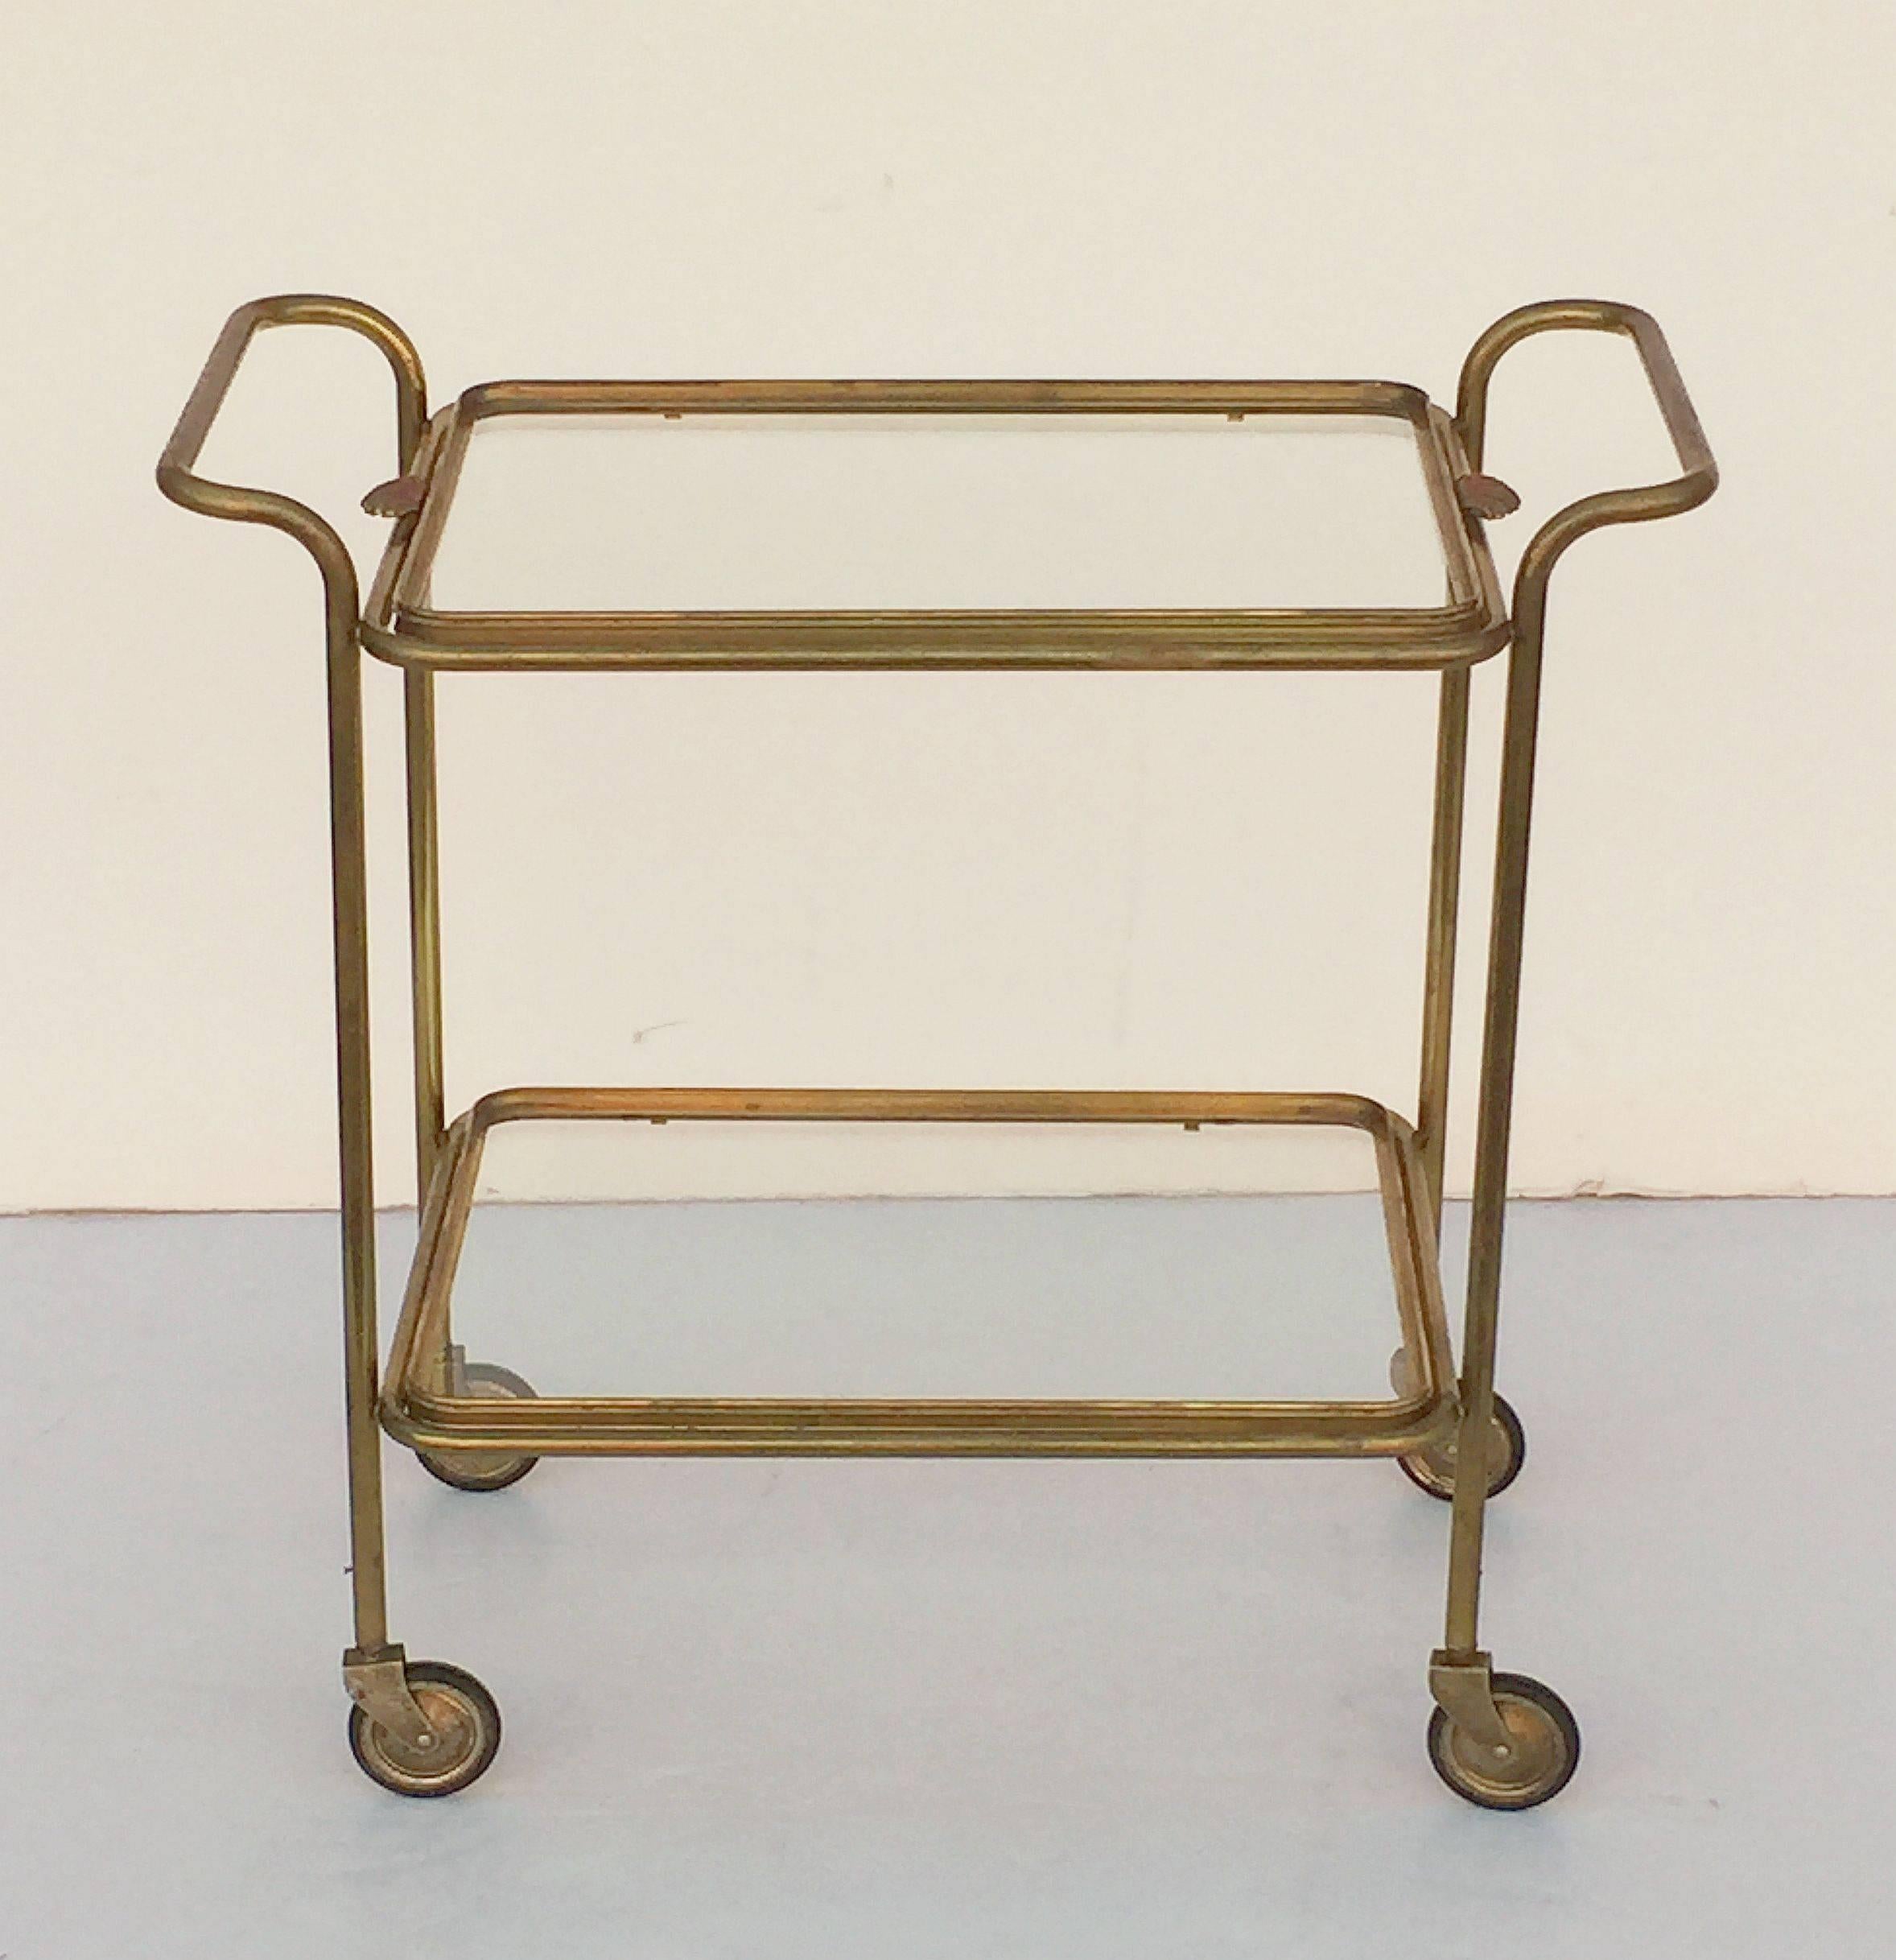 A handsome vintage French rectangular bar cart (drinks table) or serving trolley in brass, with two glass selves, on rolling caster wheels. 

The top tier is removable for use as a serving tray and features a shell design for the handles at each